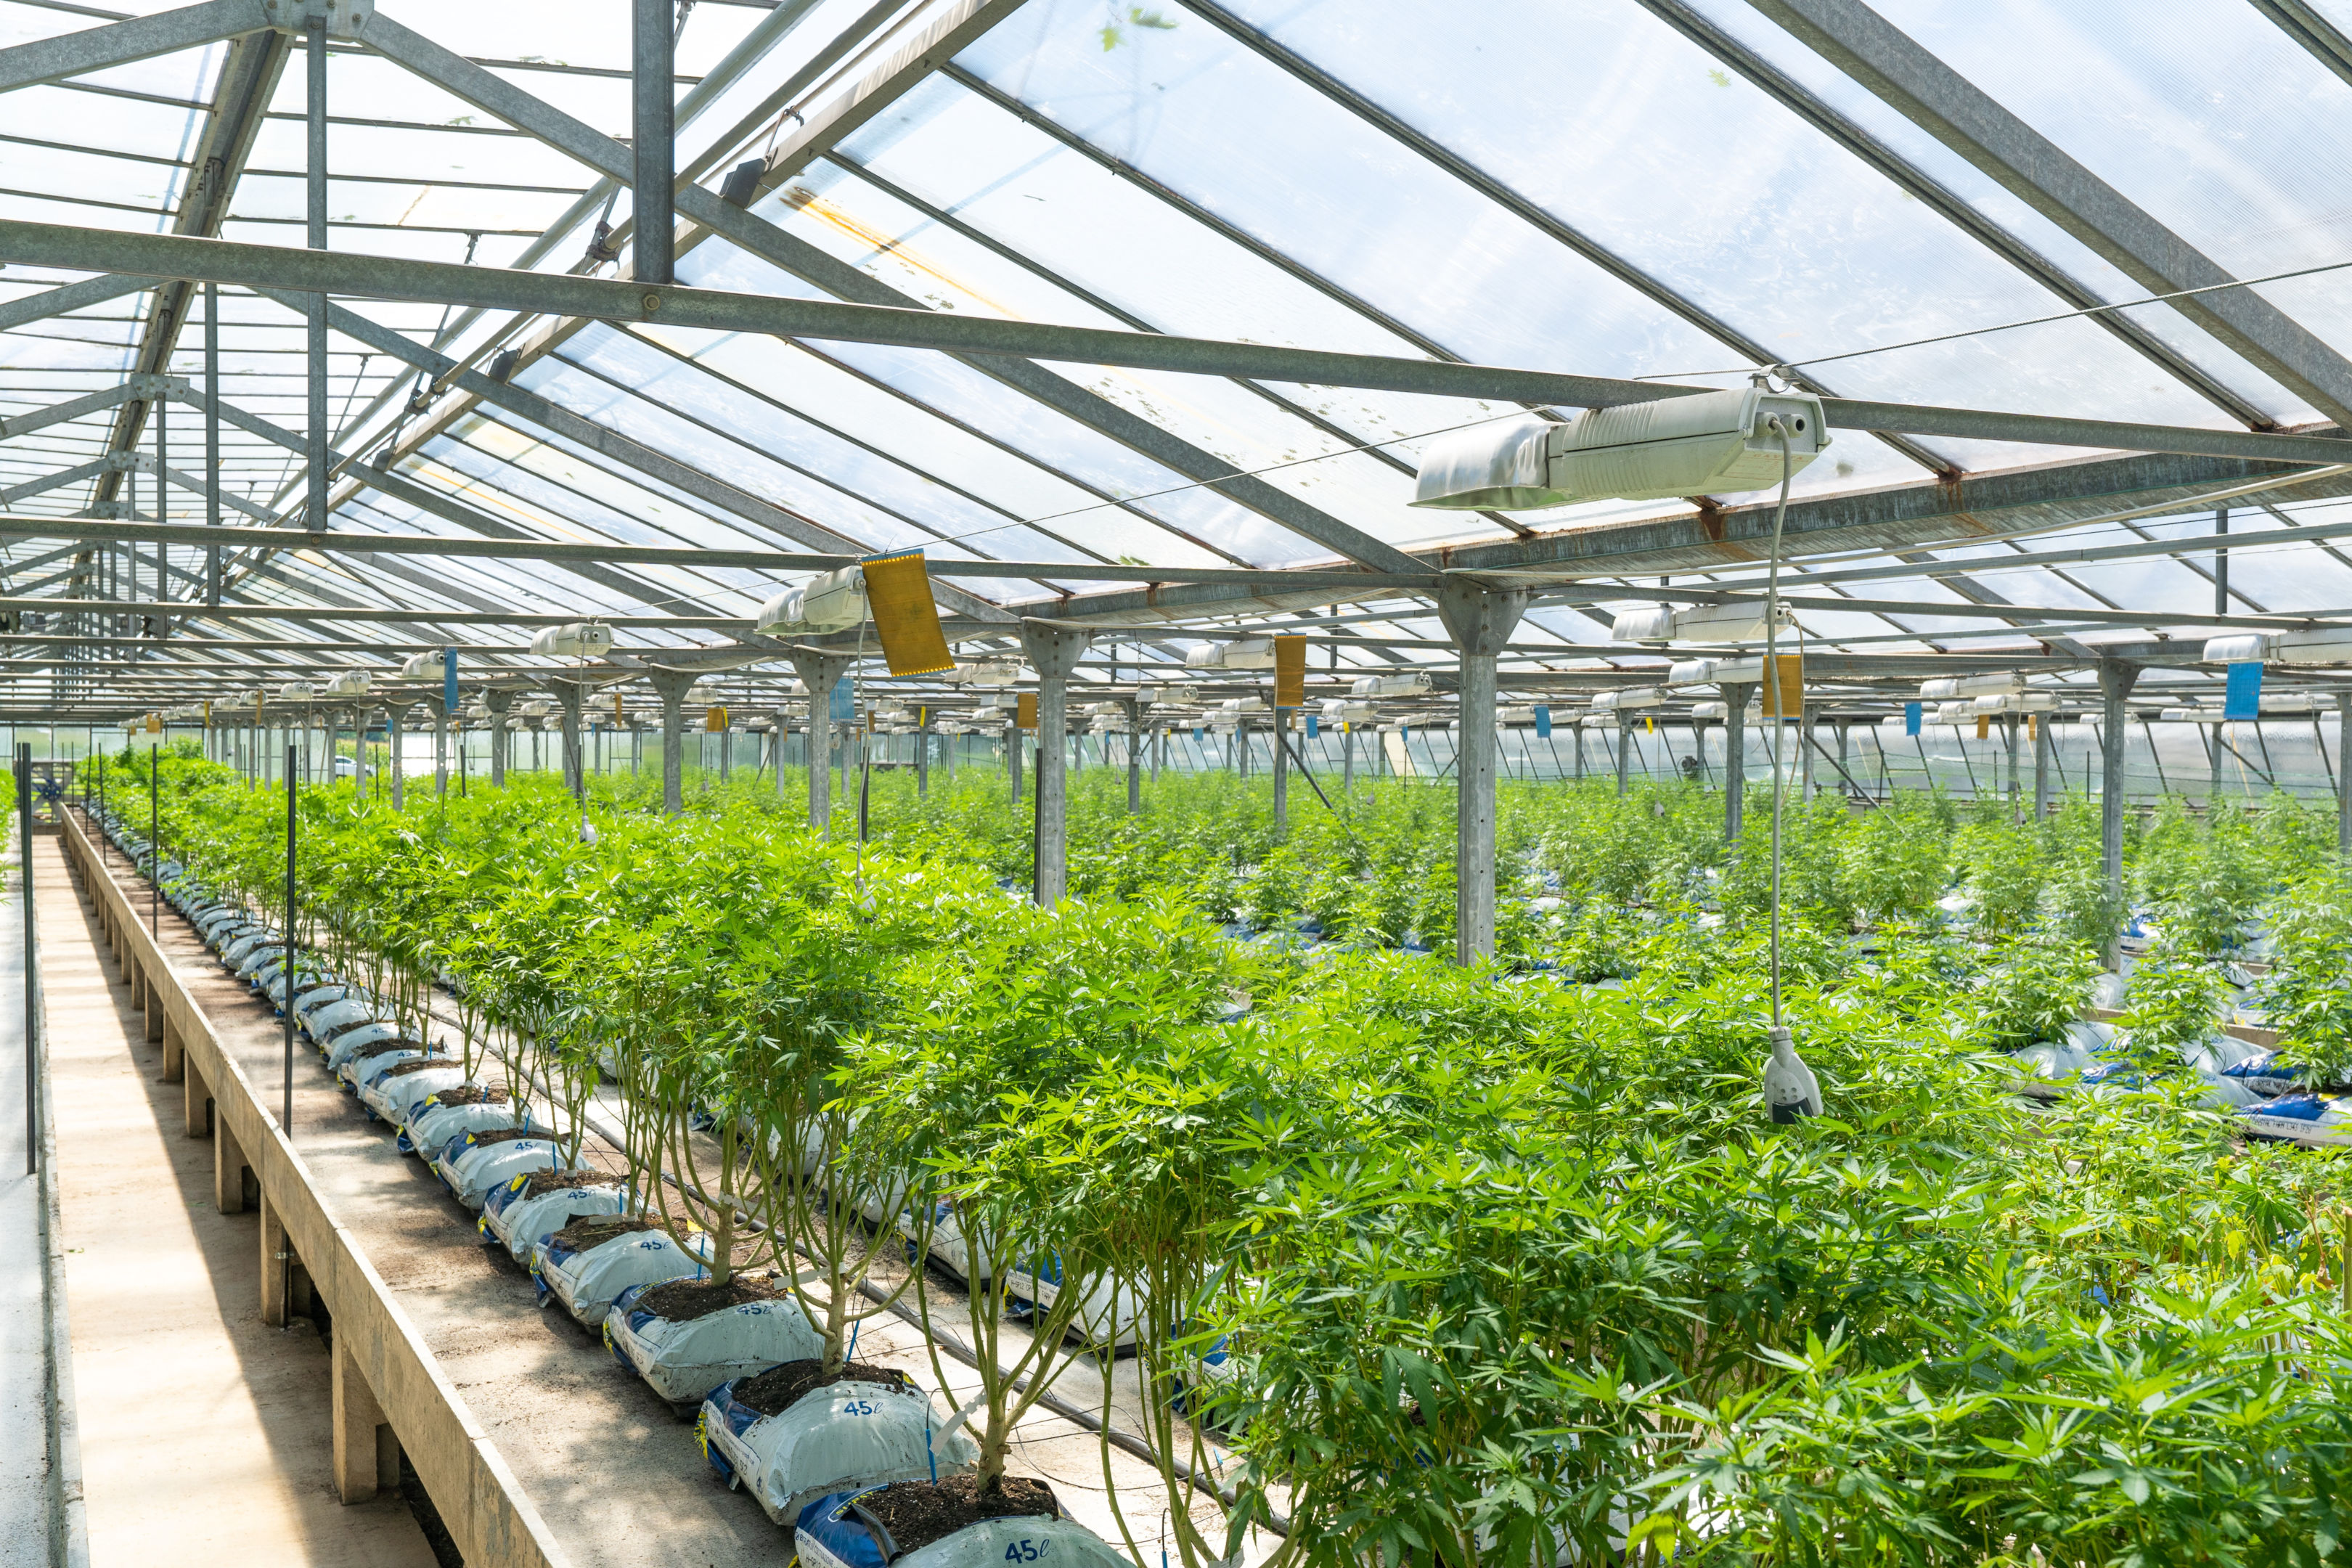 Security cameras in cannabis business with access control